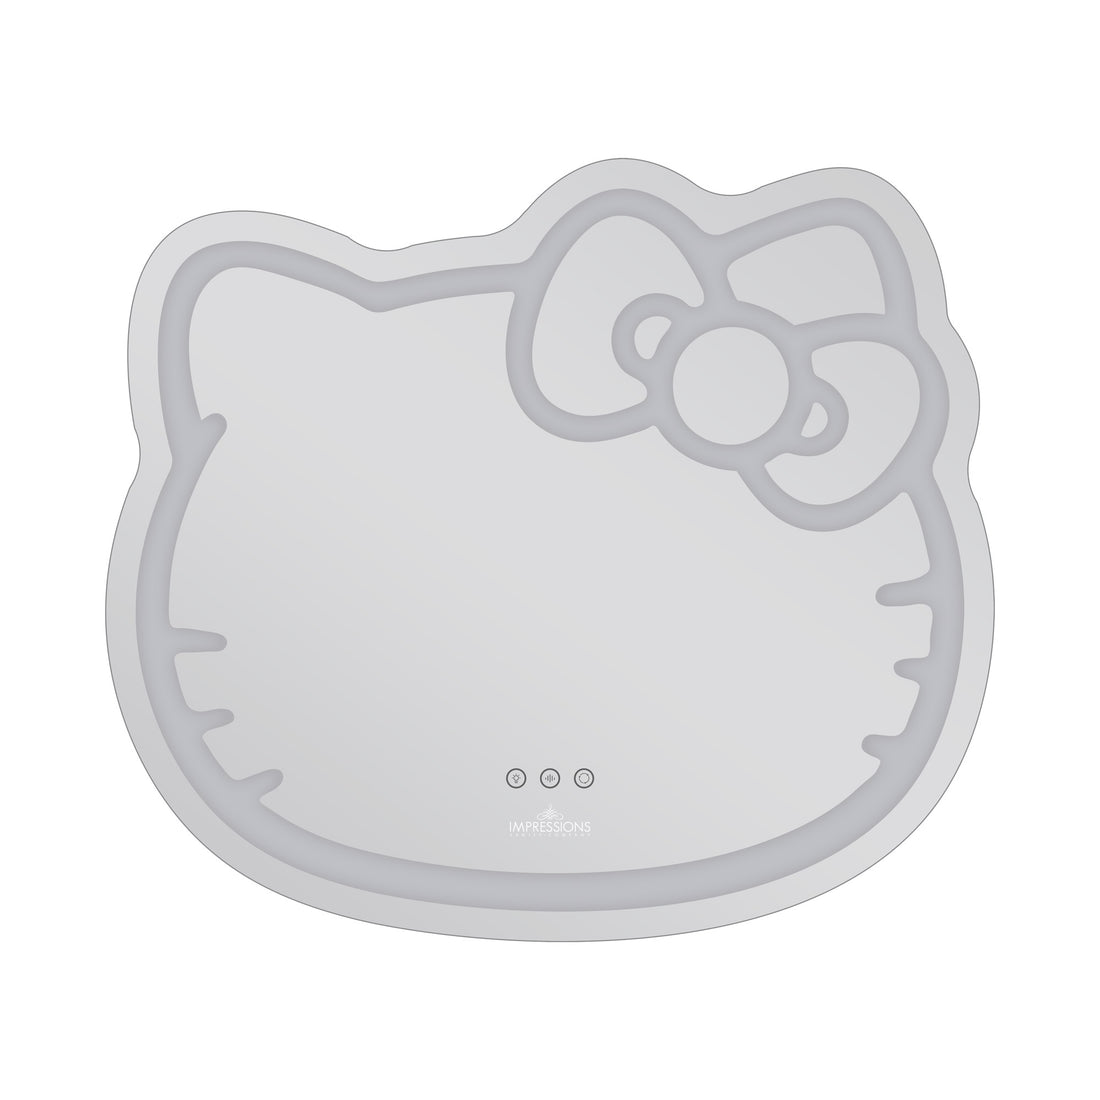 Impressions Vanity Hello Kitty Wall Smart Makeup Mirror with Wi-Fi, App Controller and Dimming LED Light (White)